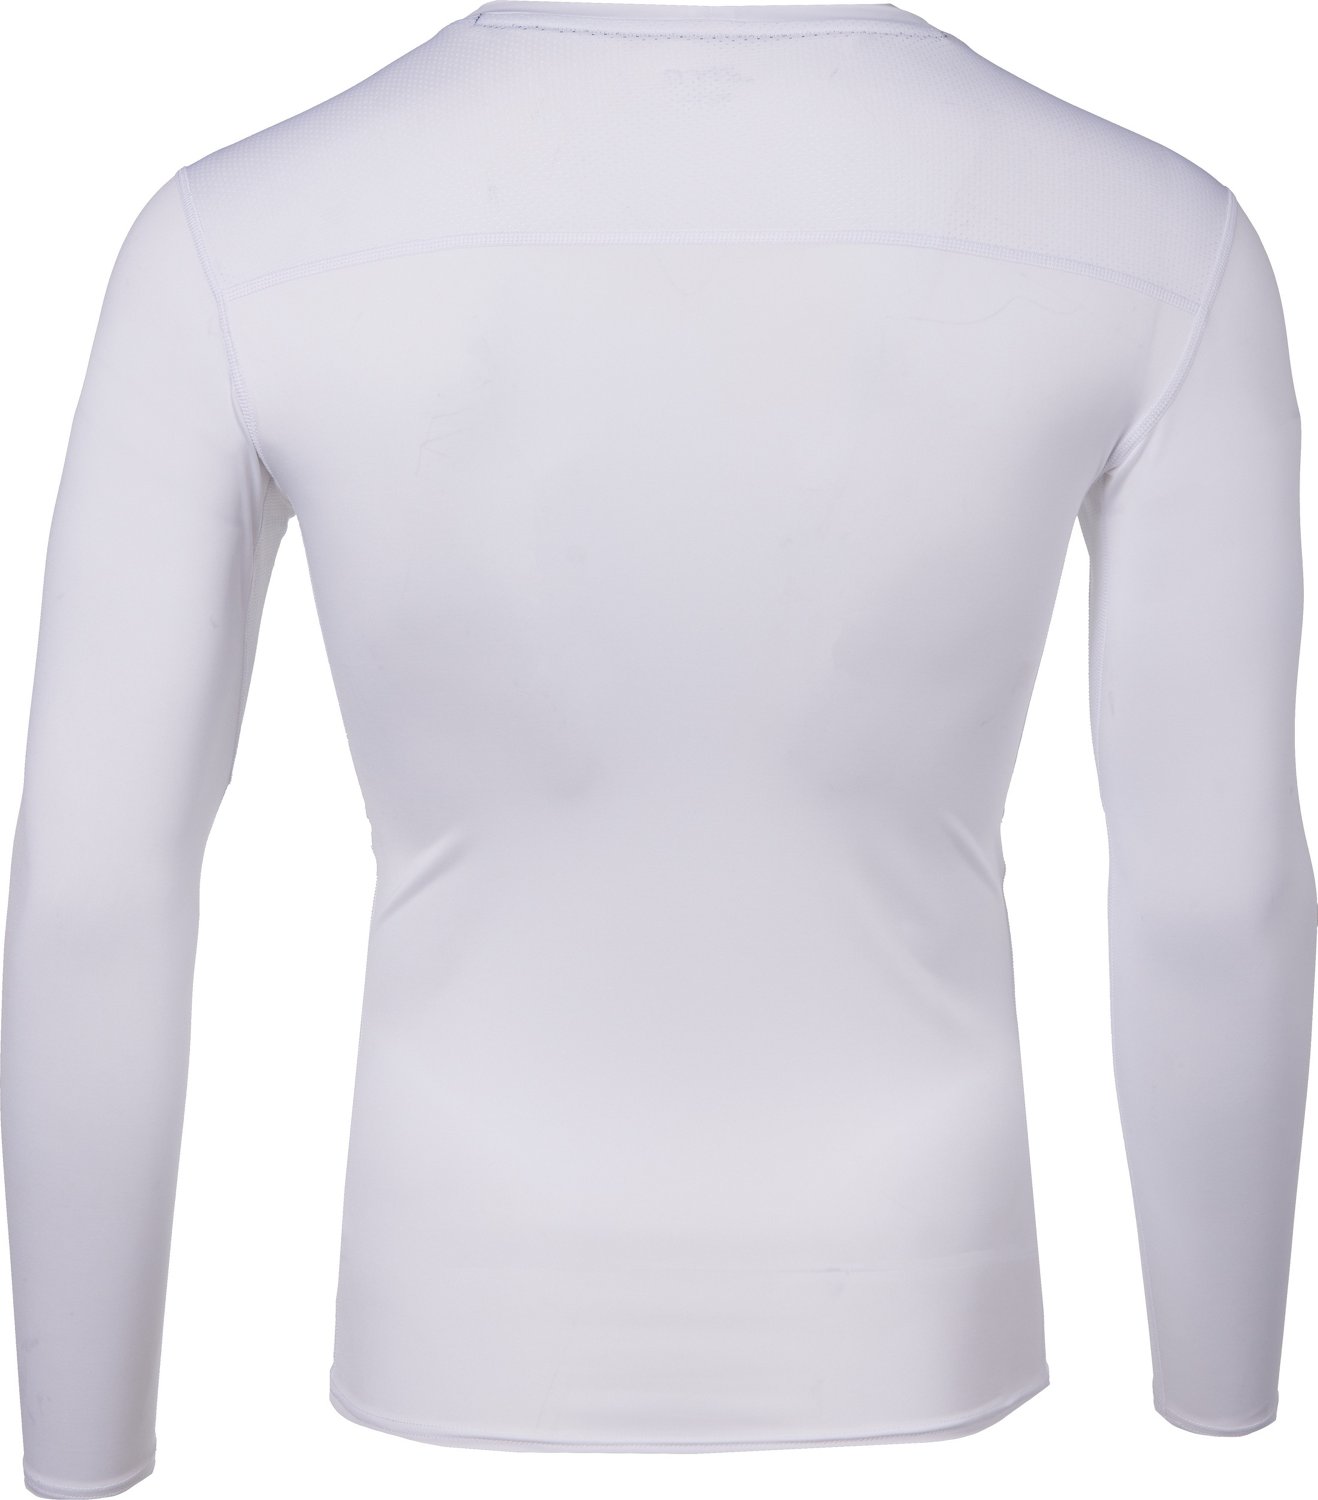 BCG Men's Sport Compression Baselayer Long Sleeve Top | Academy